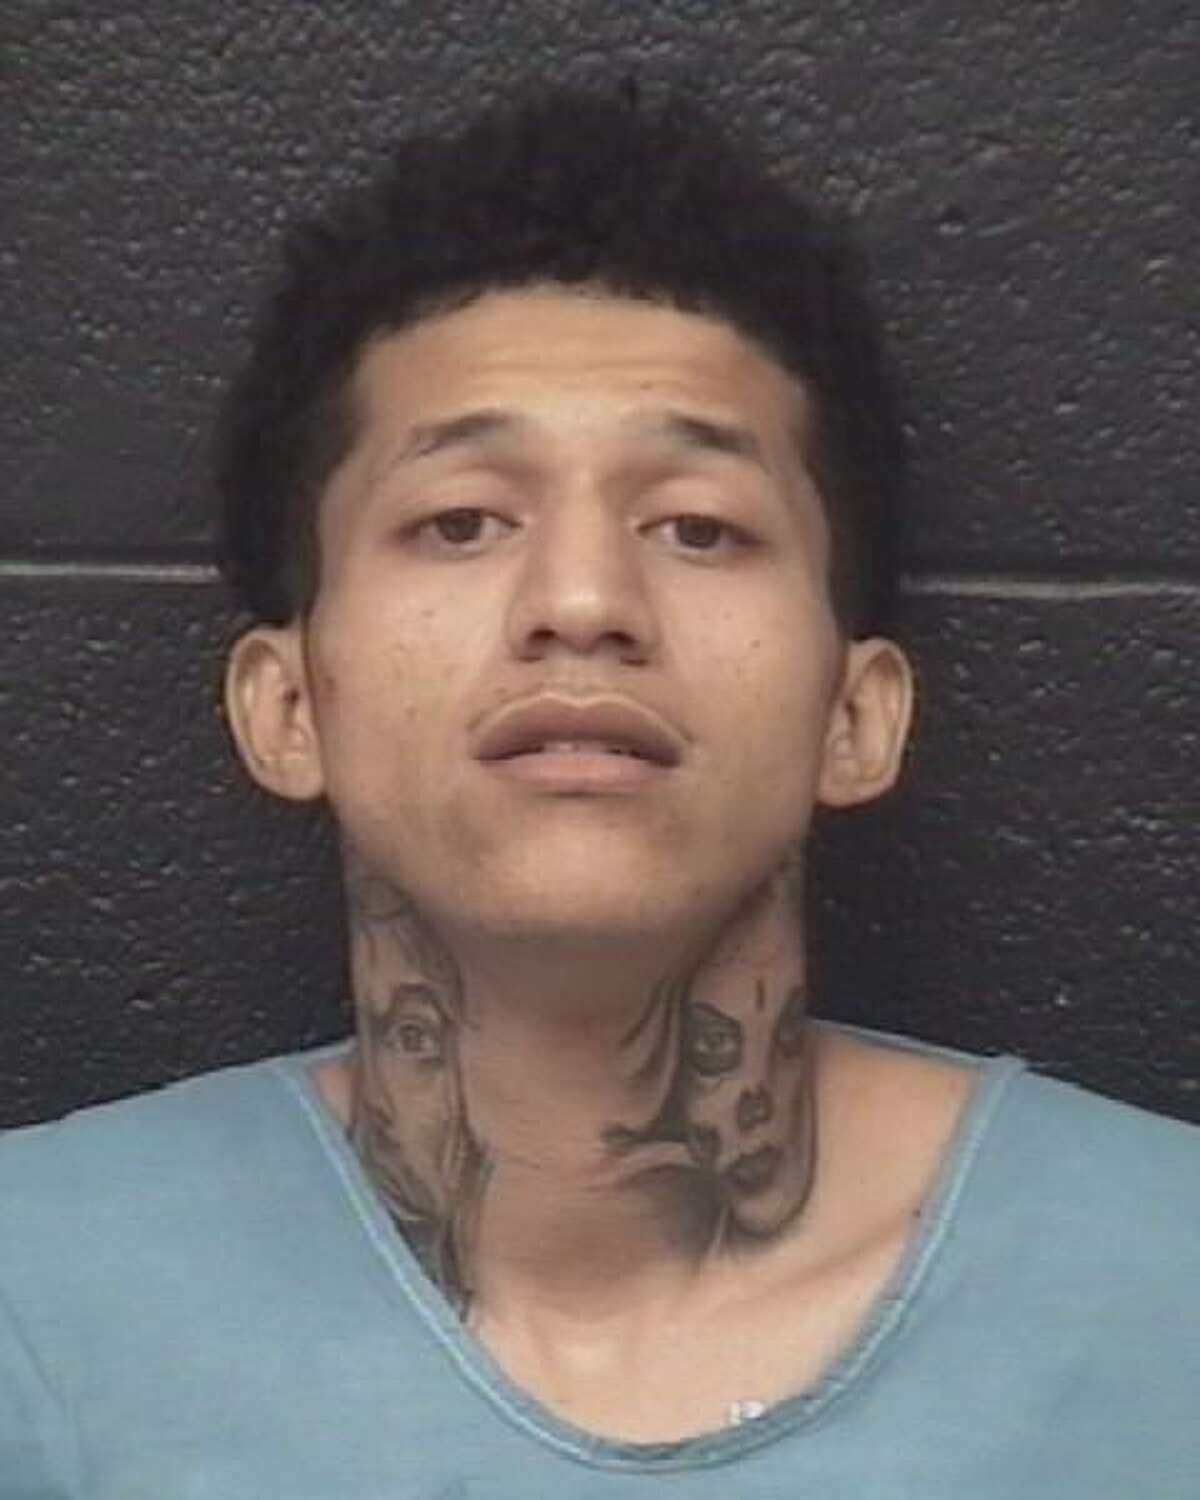 Ricardo Eduardo Garcia, 21, is wanted on an aggravated assault with a deadly weapon charge.